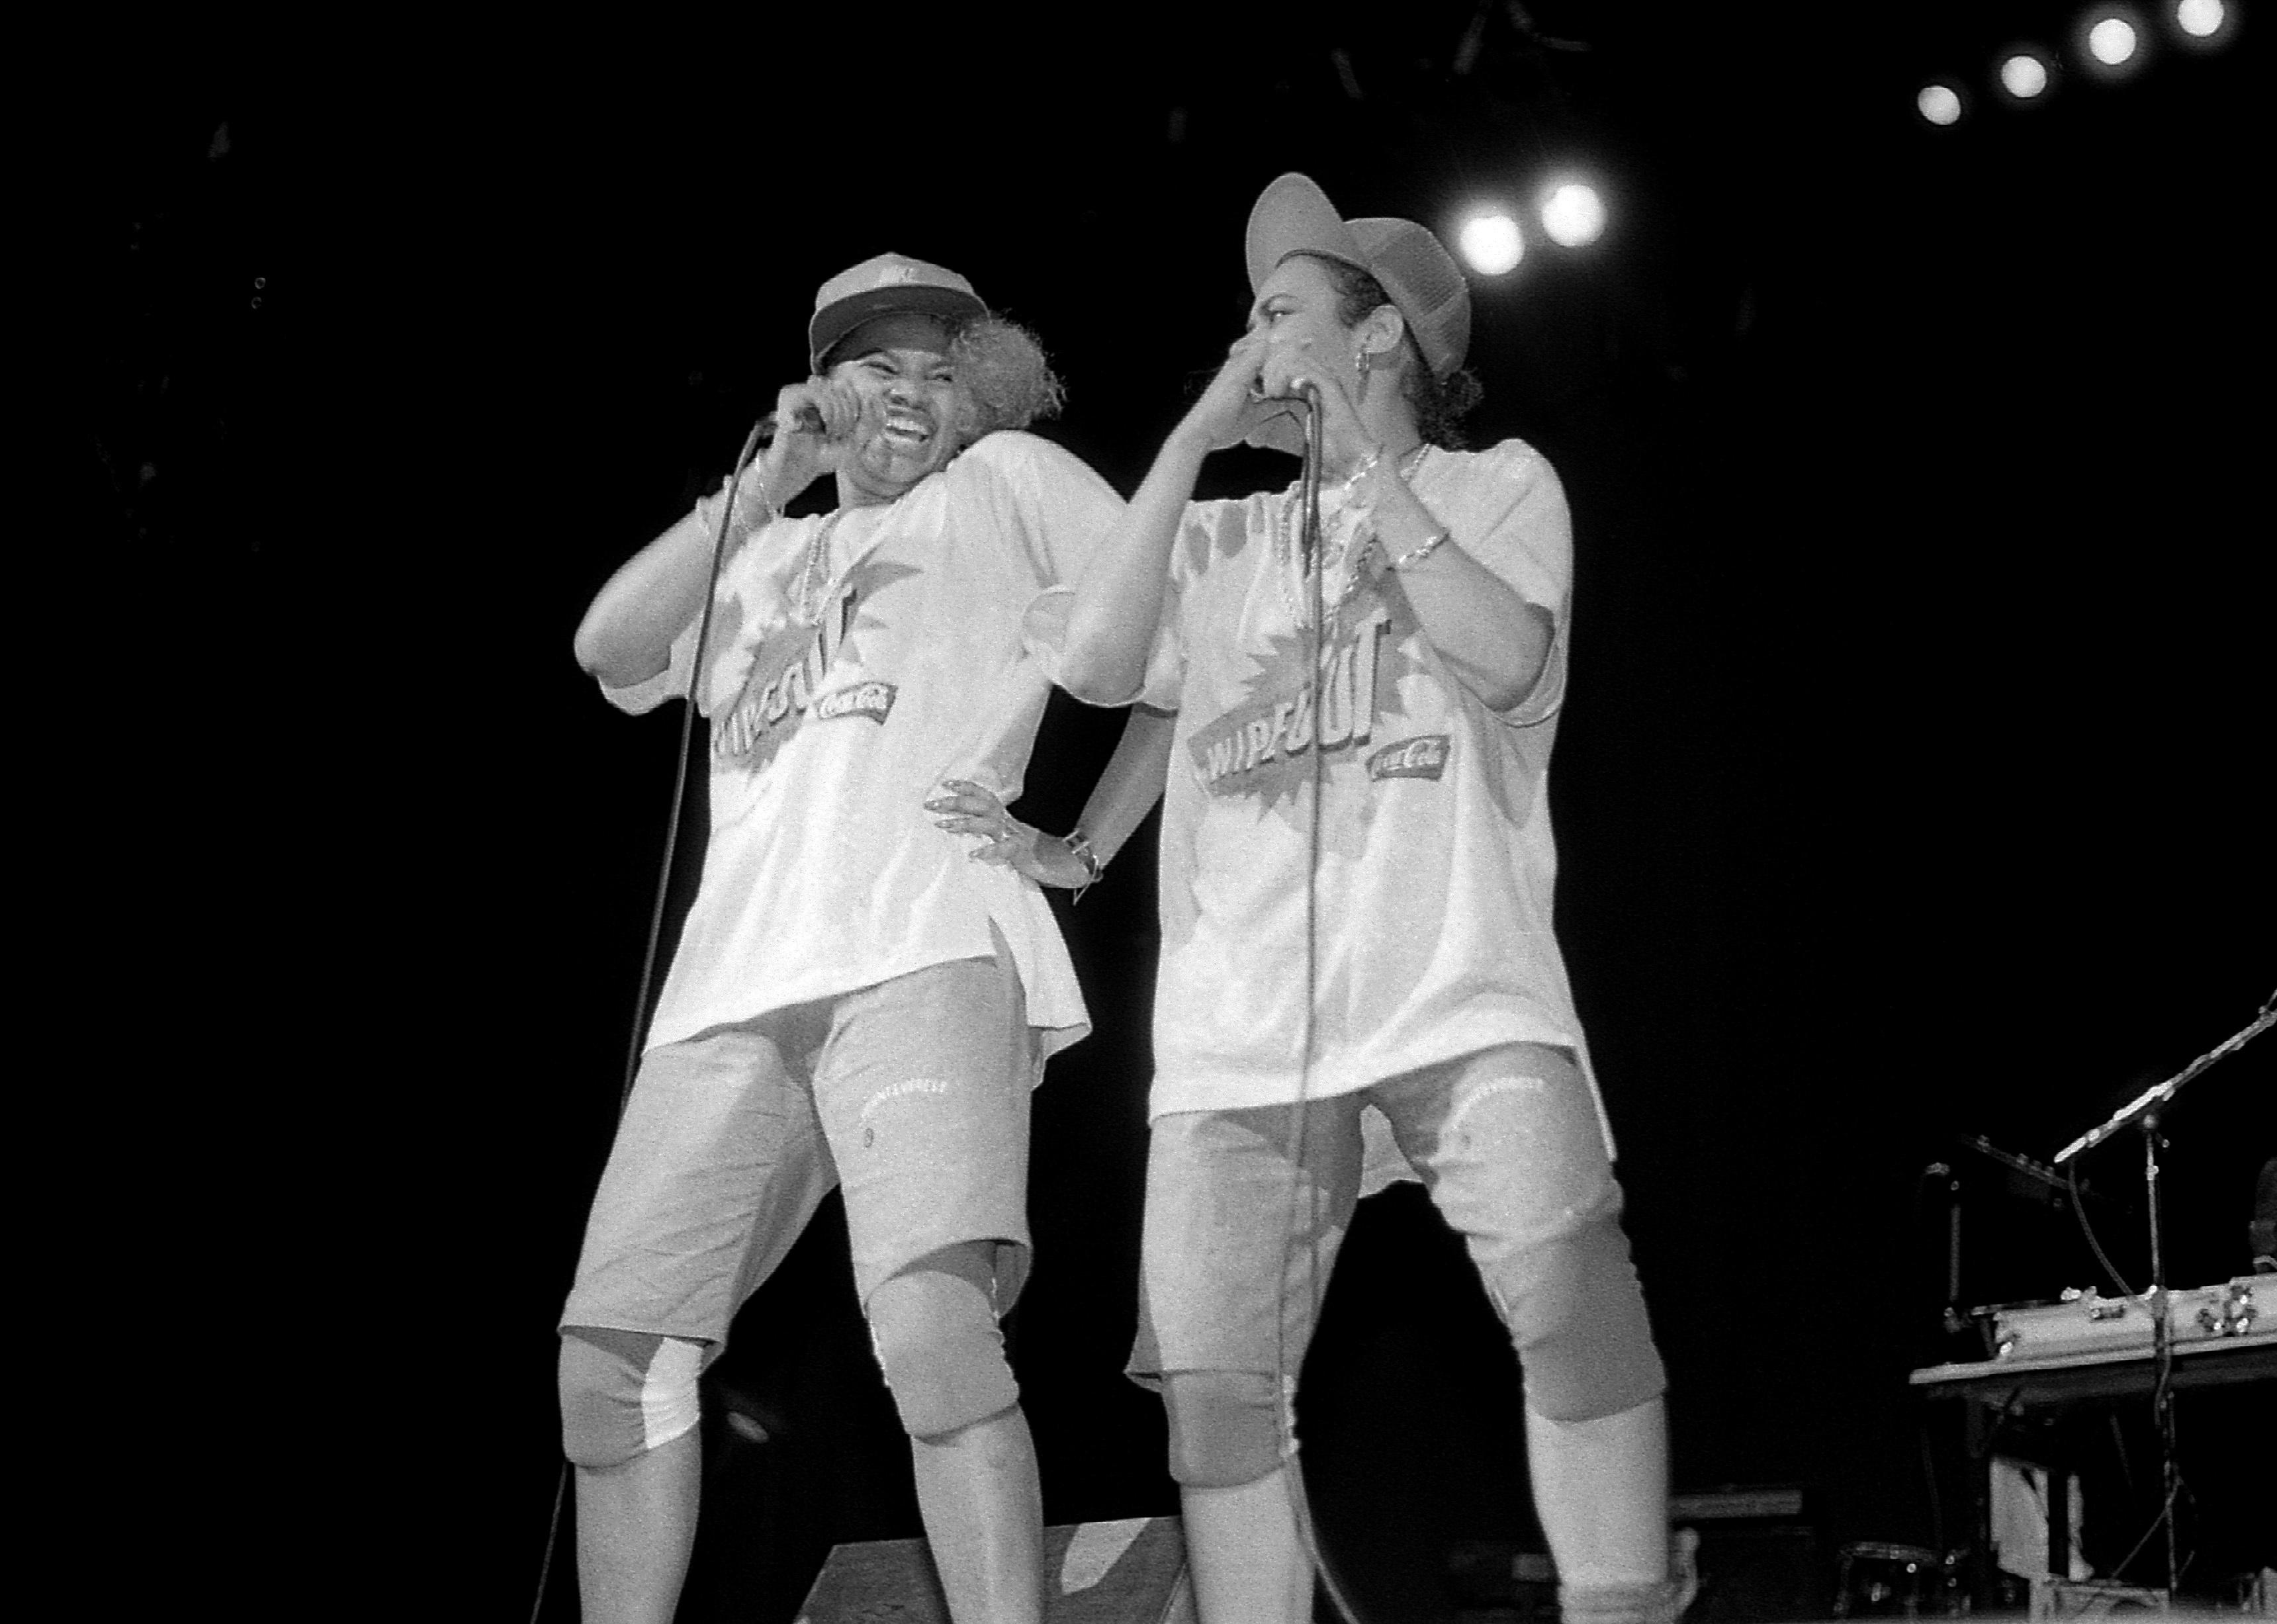 Salt-N-Pepa singing and laughing onstage in wipeout t-shirts and knee pads.